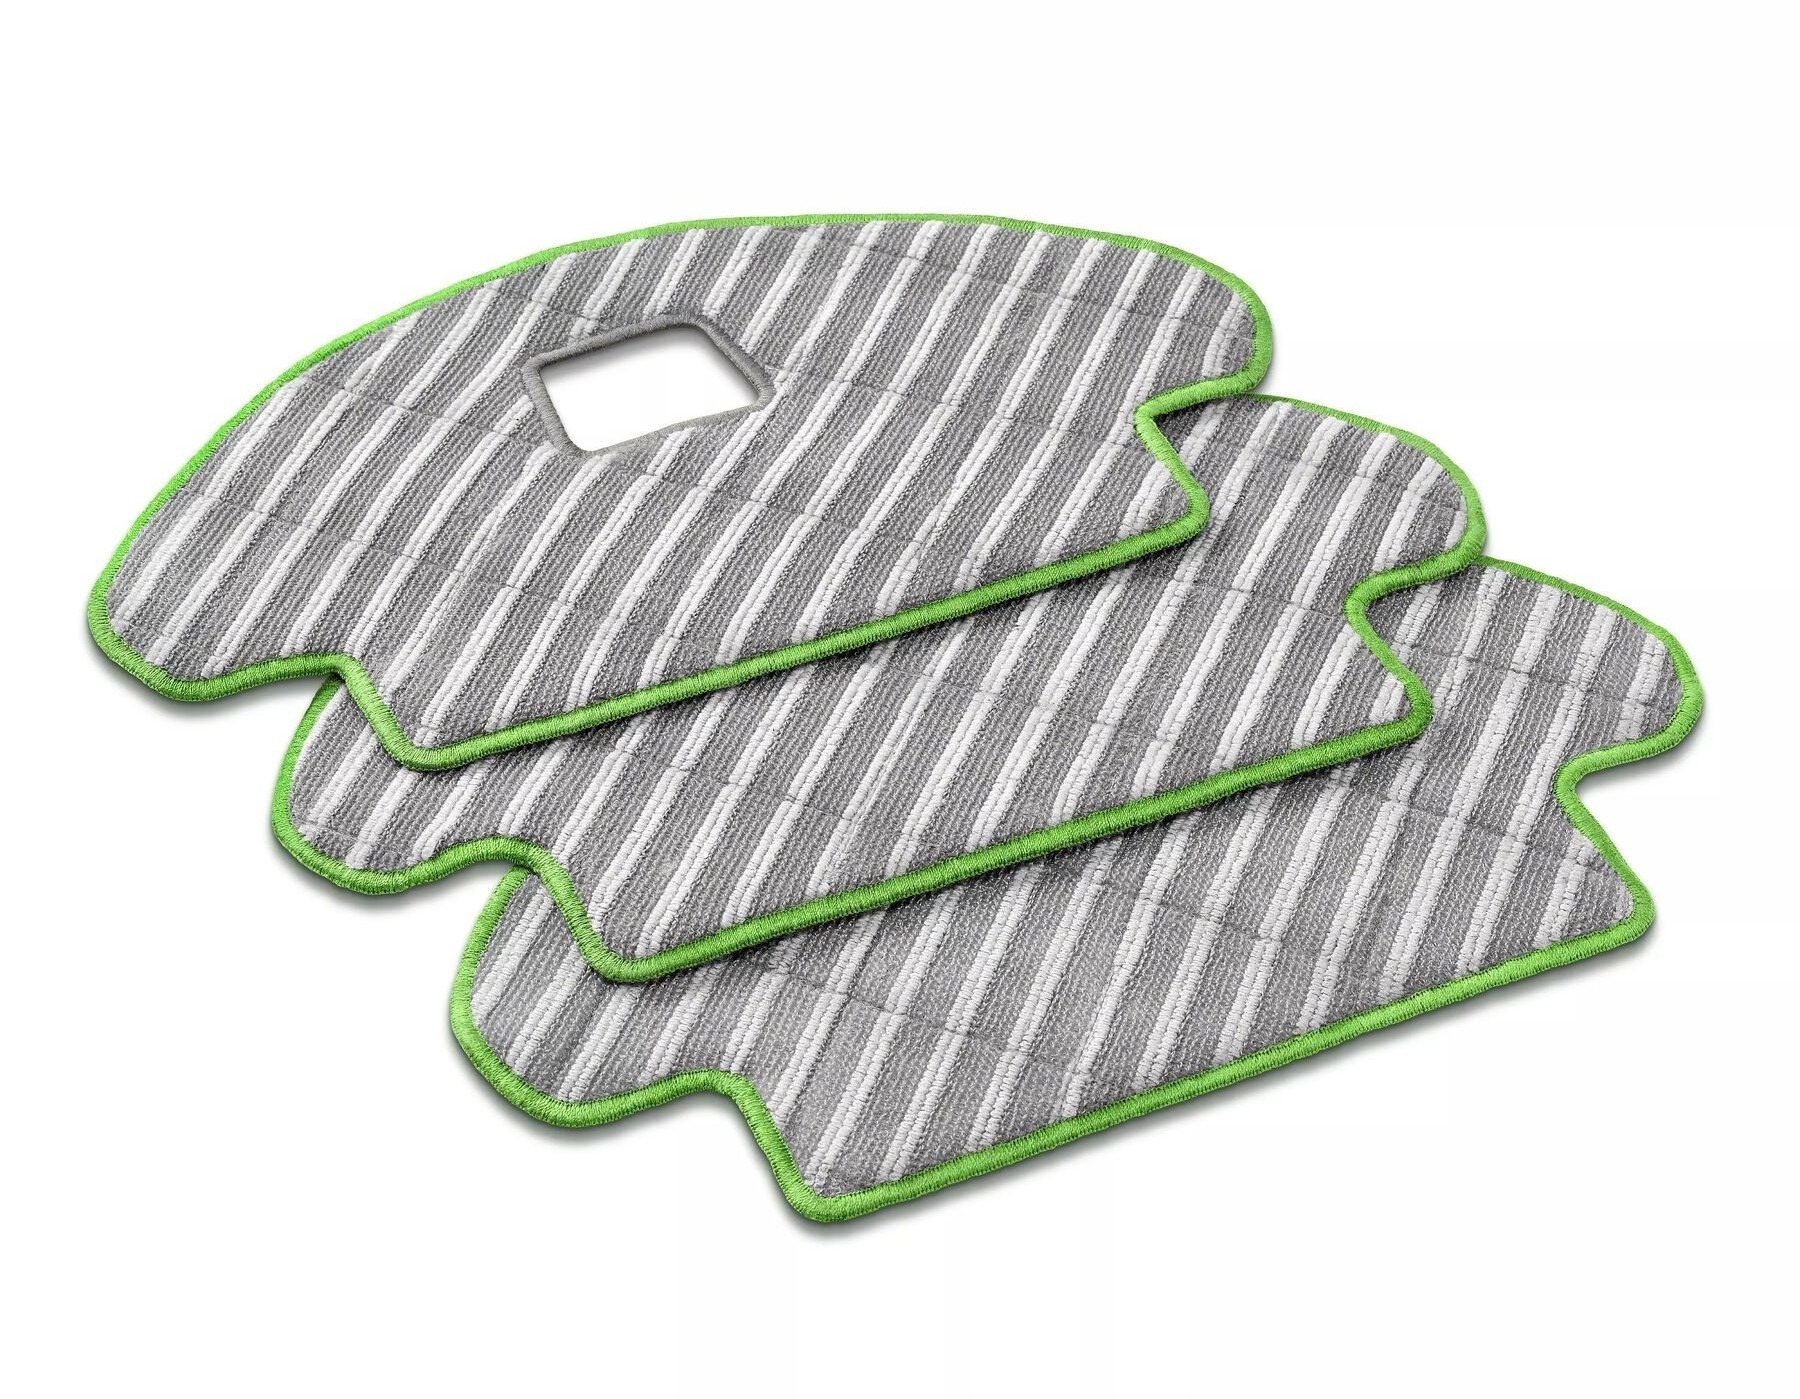 Irobot Cleaning pad pack Stofzuiger accessoire